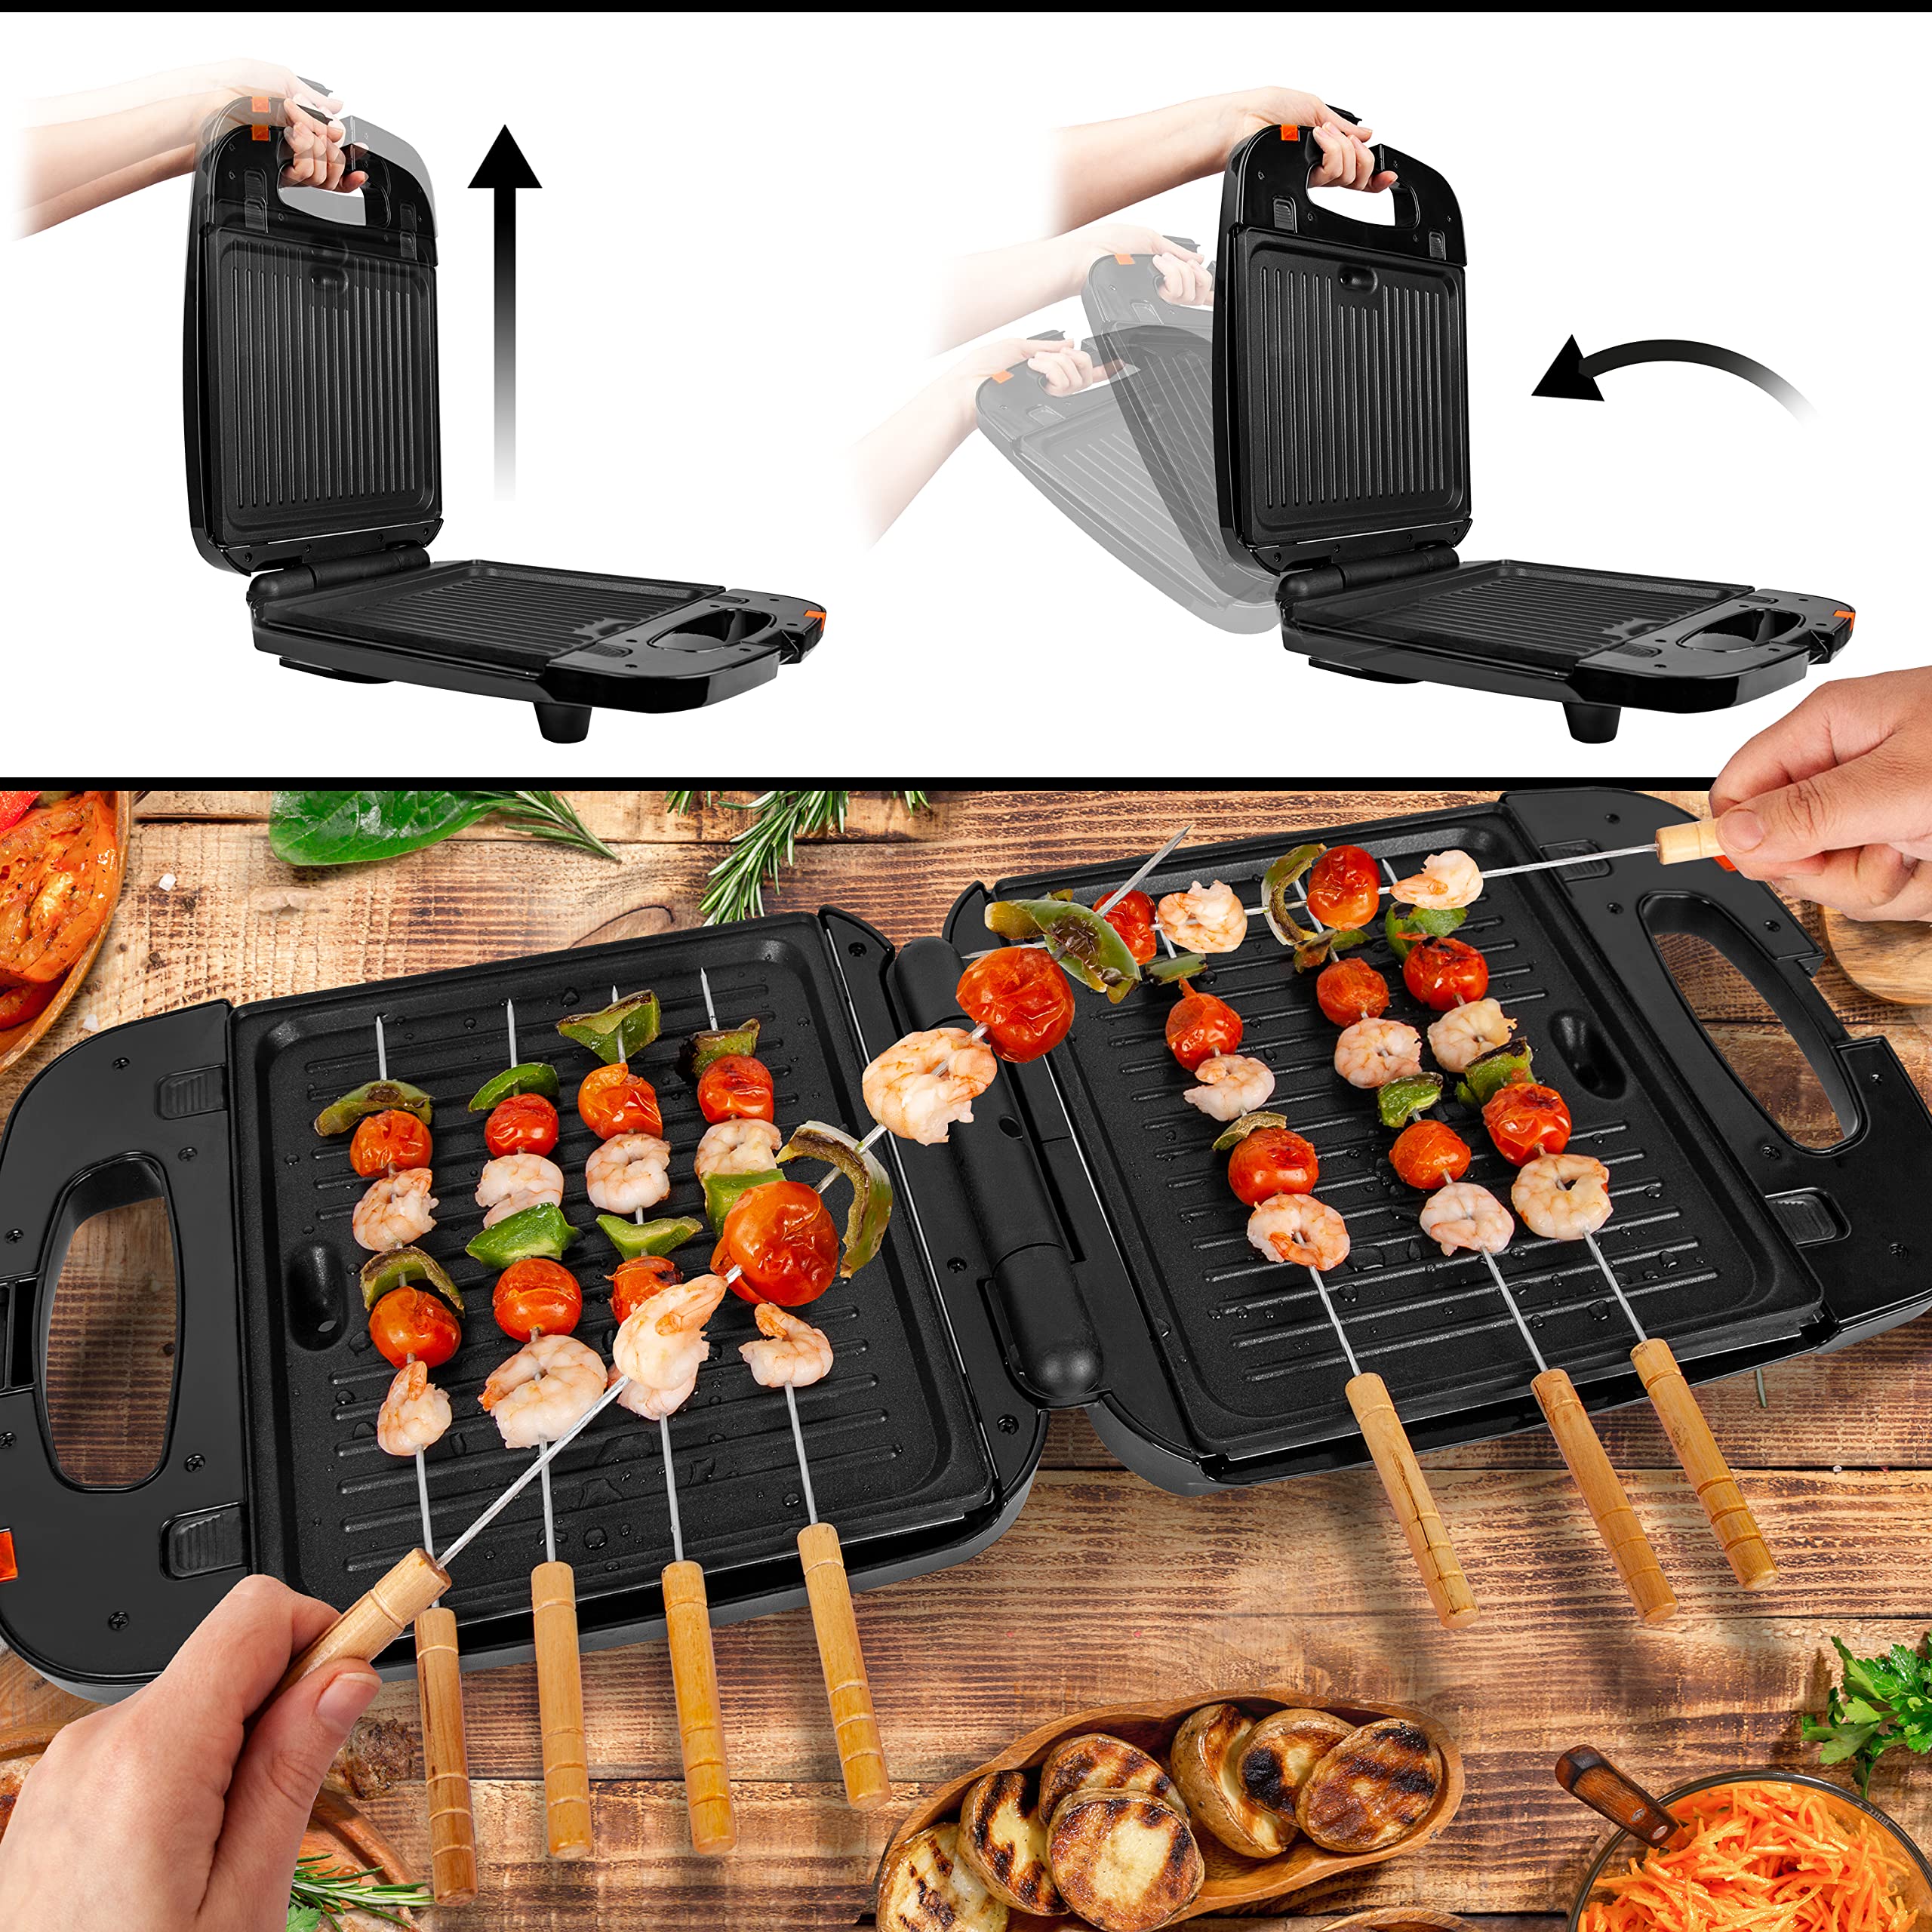 Duronic 2-in-1 Grill Machine GWM60, Panini Hotplates and Waffle Irons, INTERCHANGEABLE PLATES, 1200W, Non-Stick, Automatic Temperature Control, Comes with 2x Grill and 2x Waffle Plates